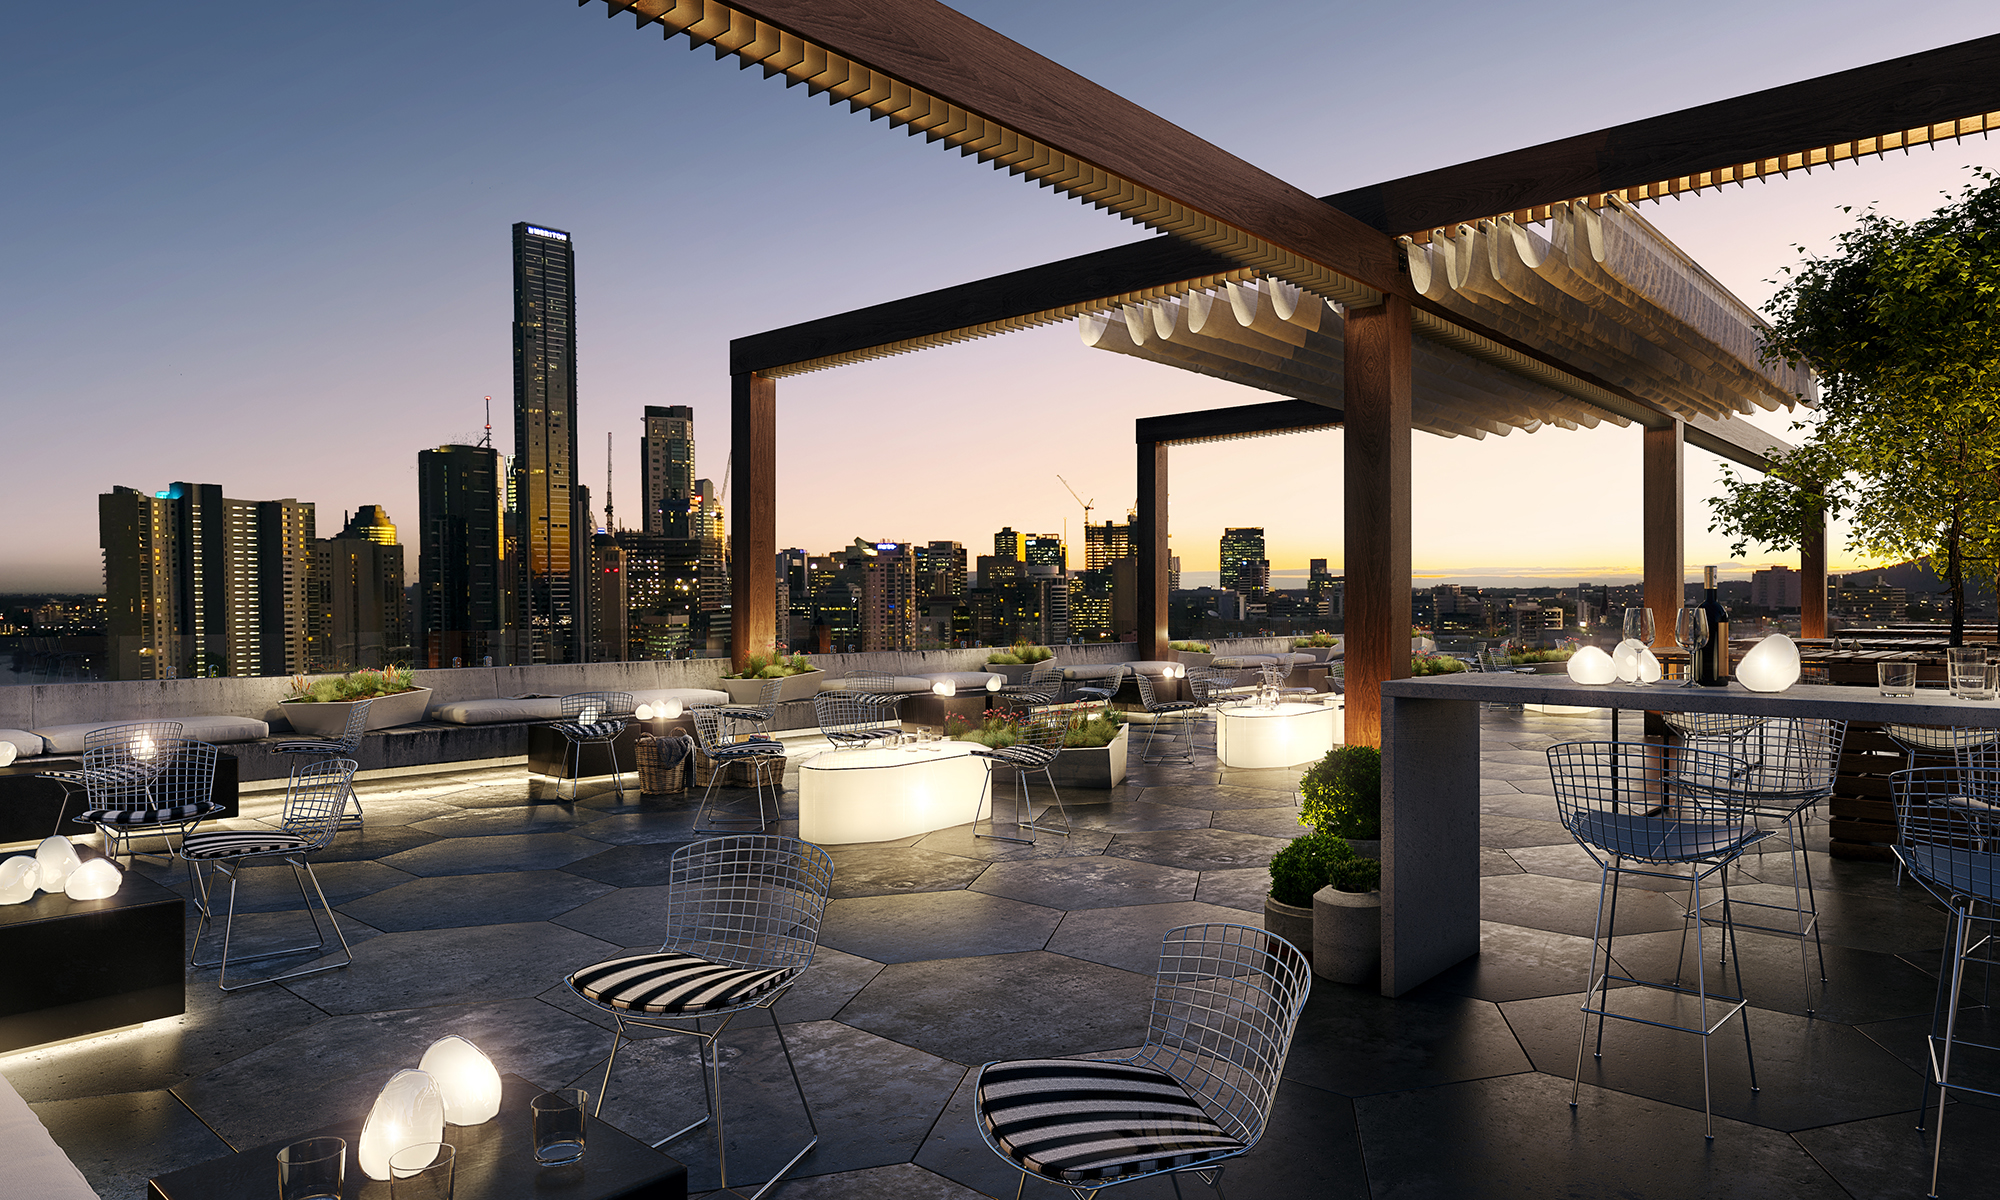 Rooftop outdoor seating area with a stunning hexagonal stone tile flooring and operable awnings, offering a panoramic view of the Brisbane city skyline.